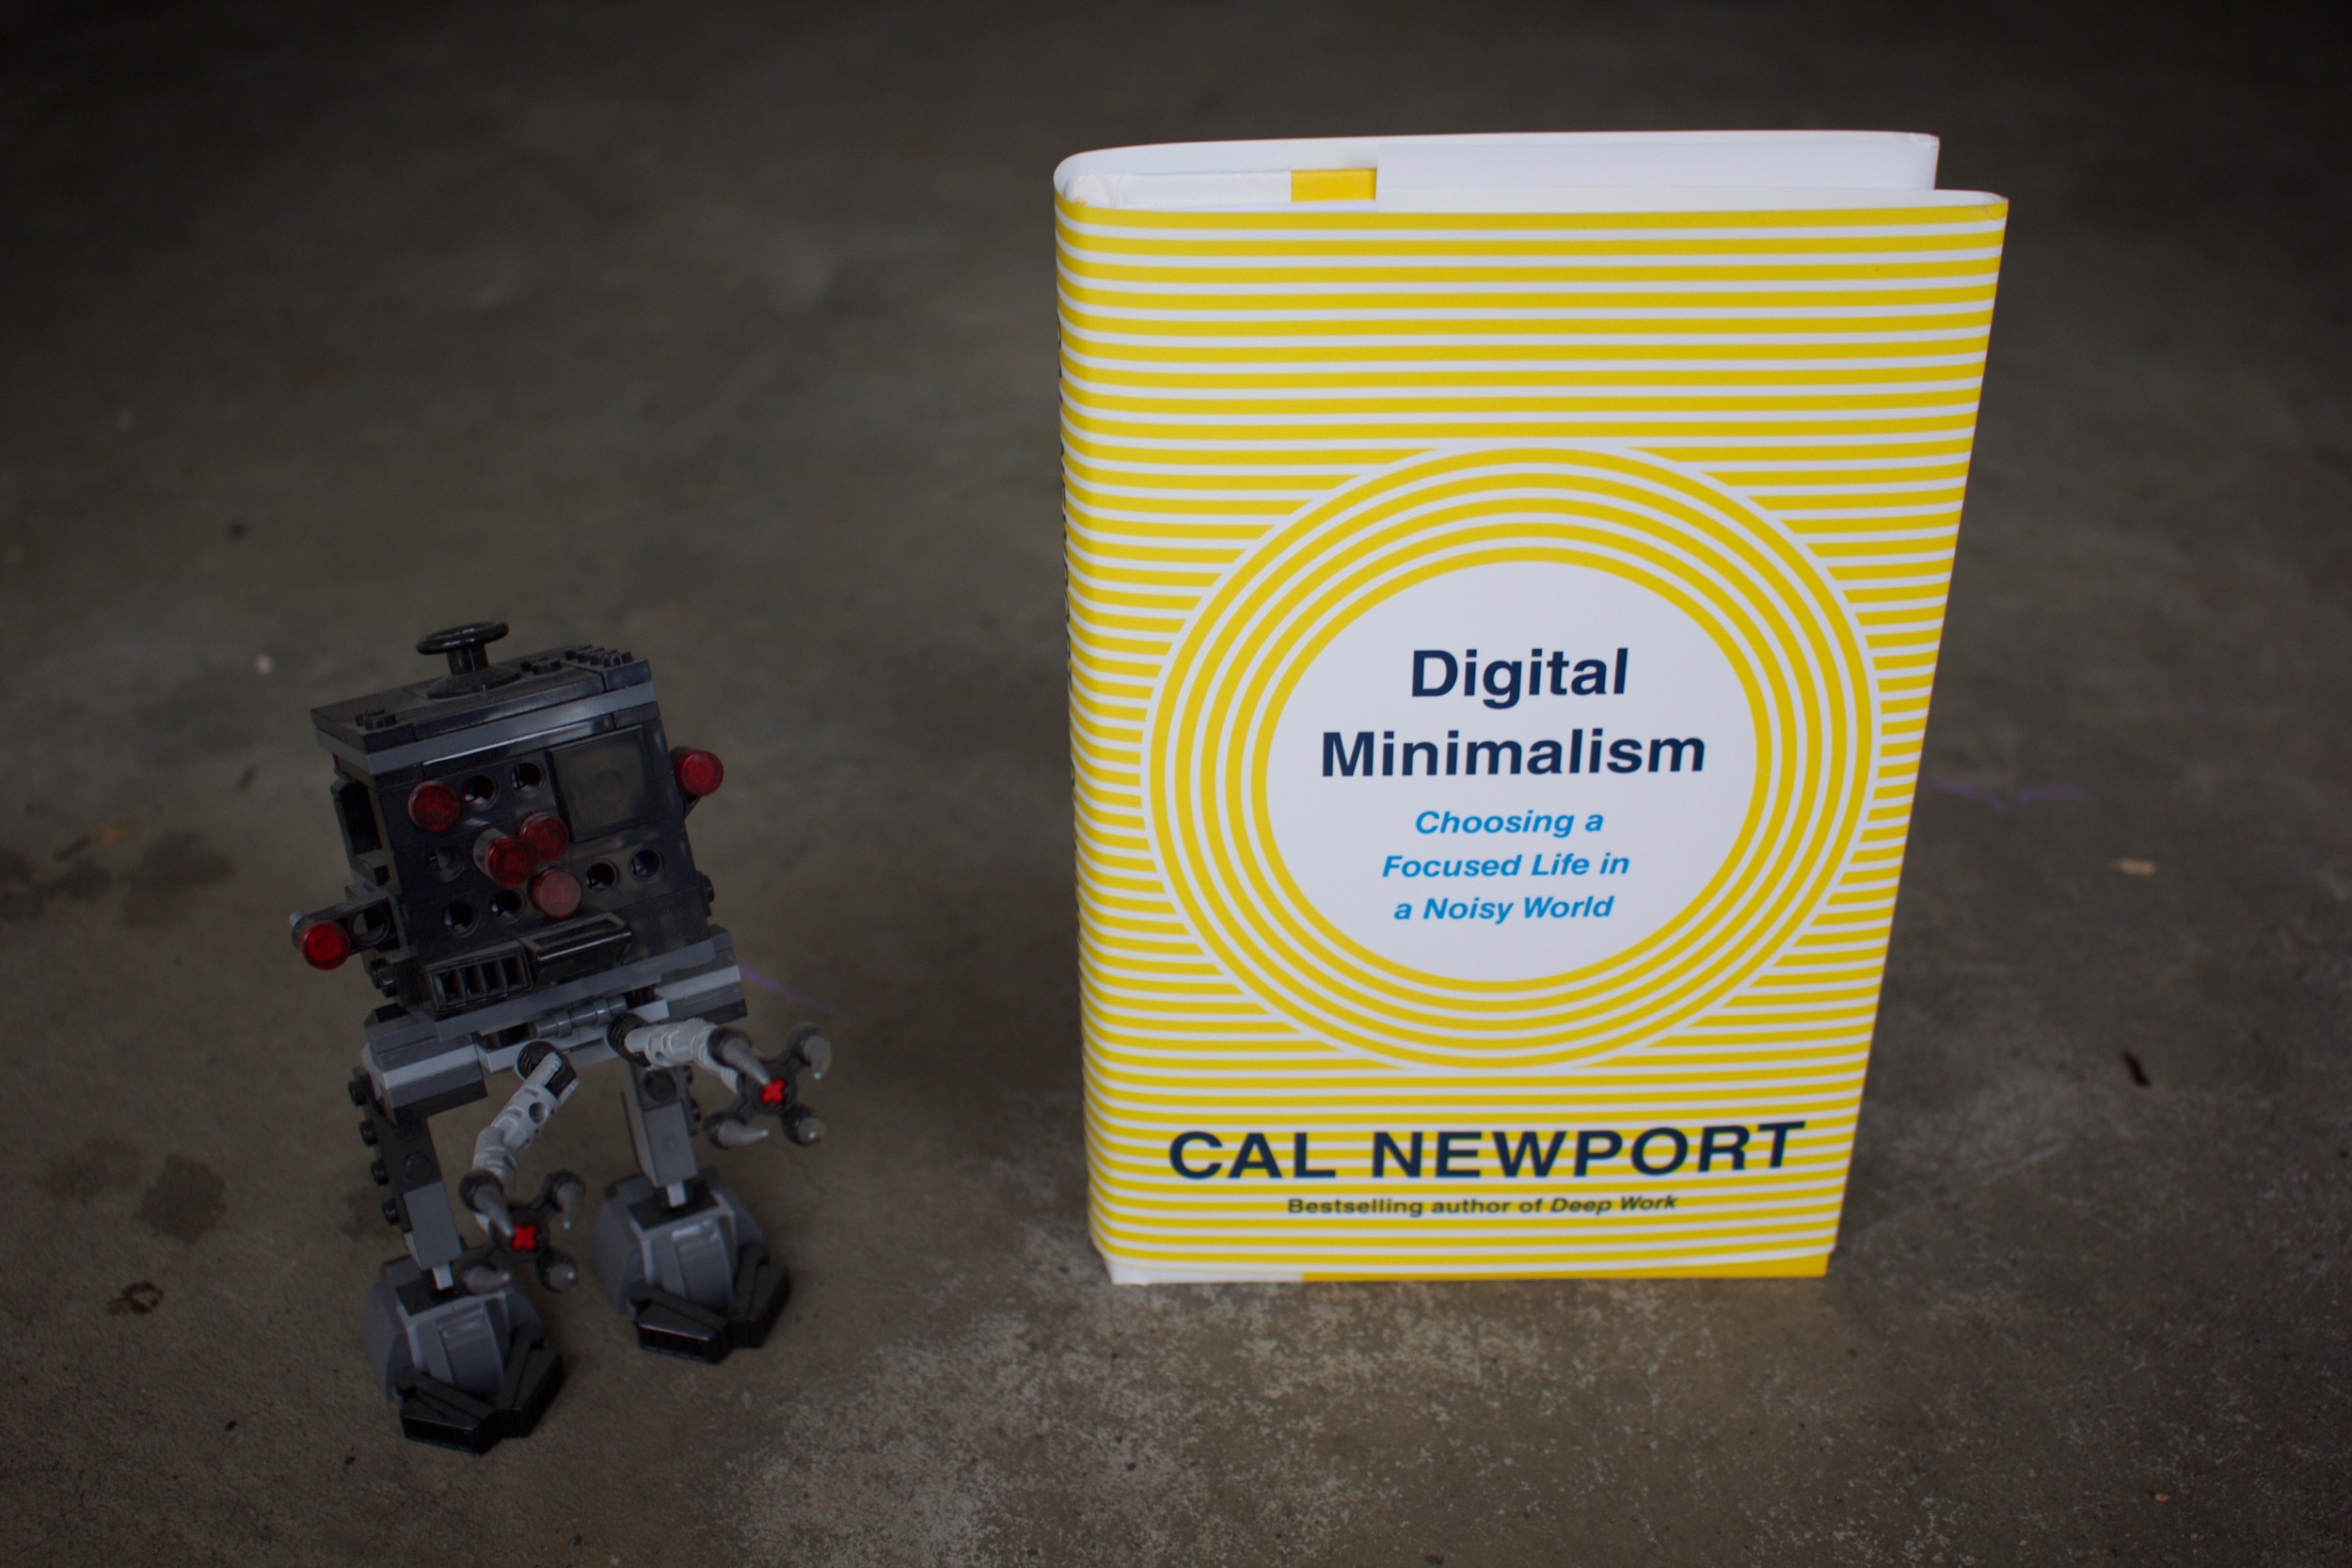 A Review of Digital Minimalism by Cal Newport